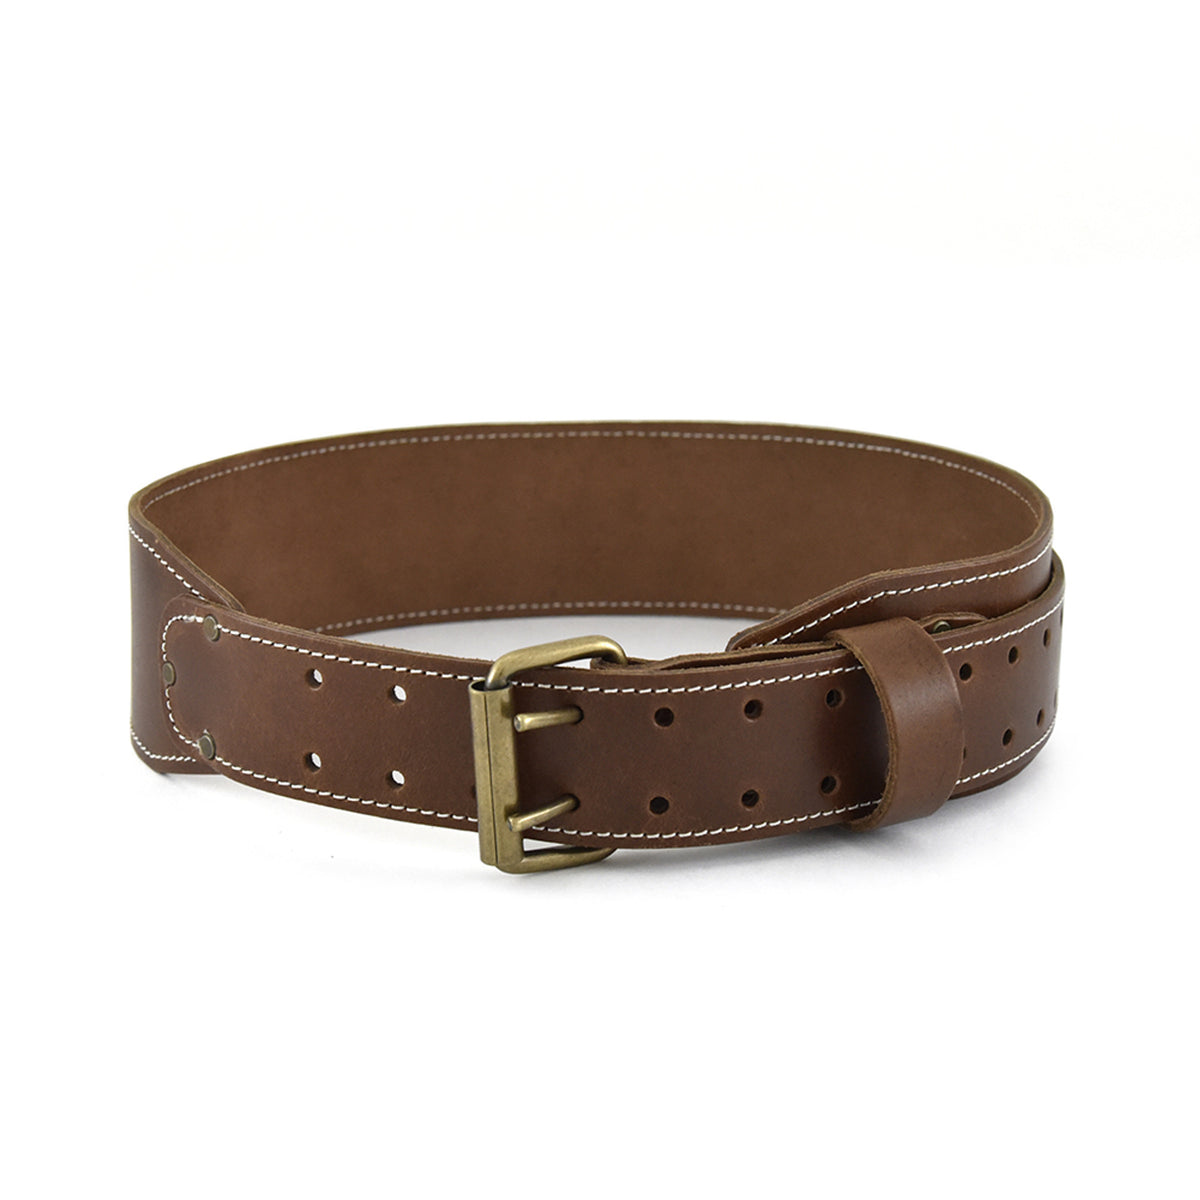 3 Inch Wide Leather Belt | 3 Inch Leather Tool Belt | Style n Craft ...